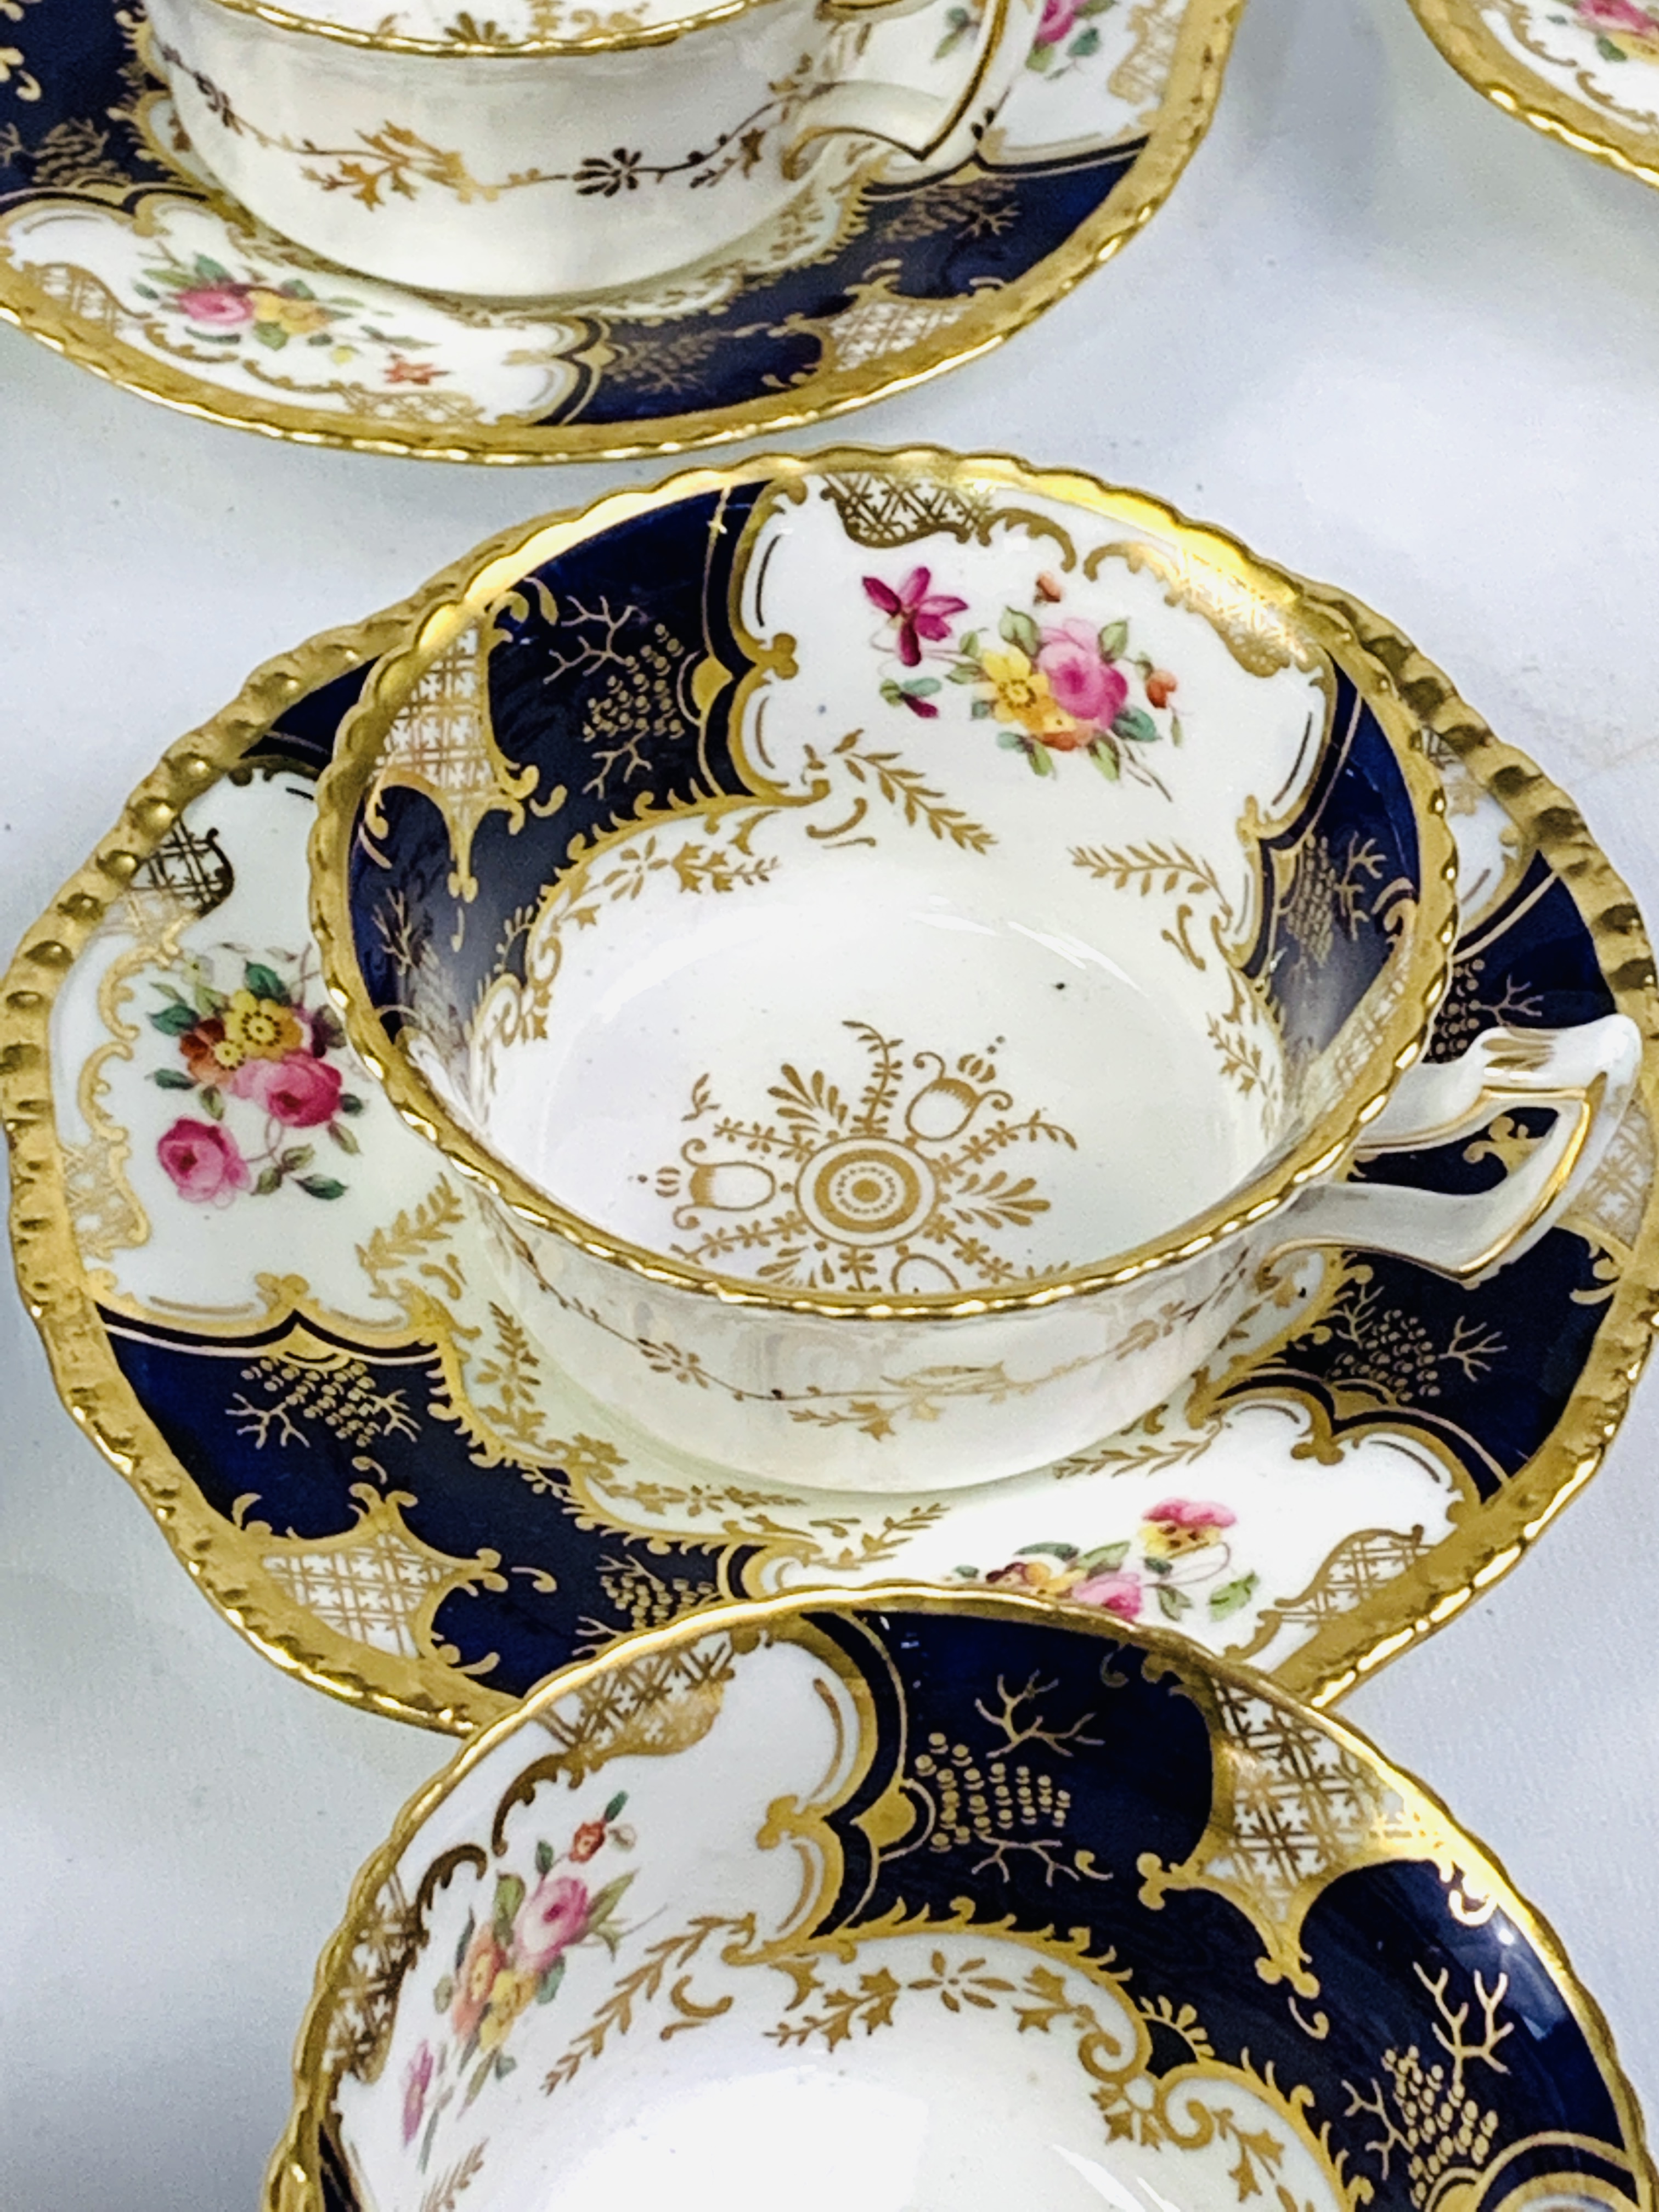 Eleven blue and gold hand painted Coalport cups and saucers - Image 4 of 6